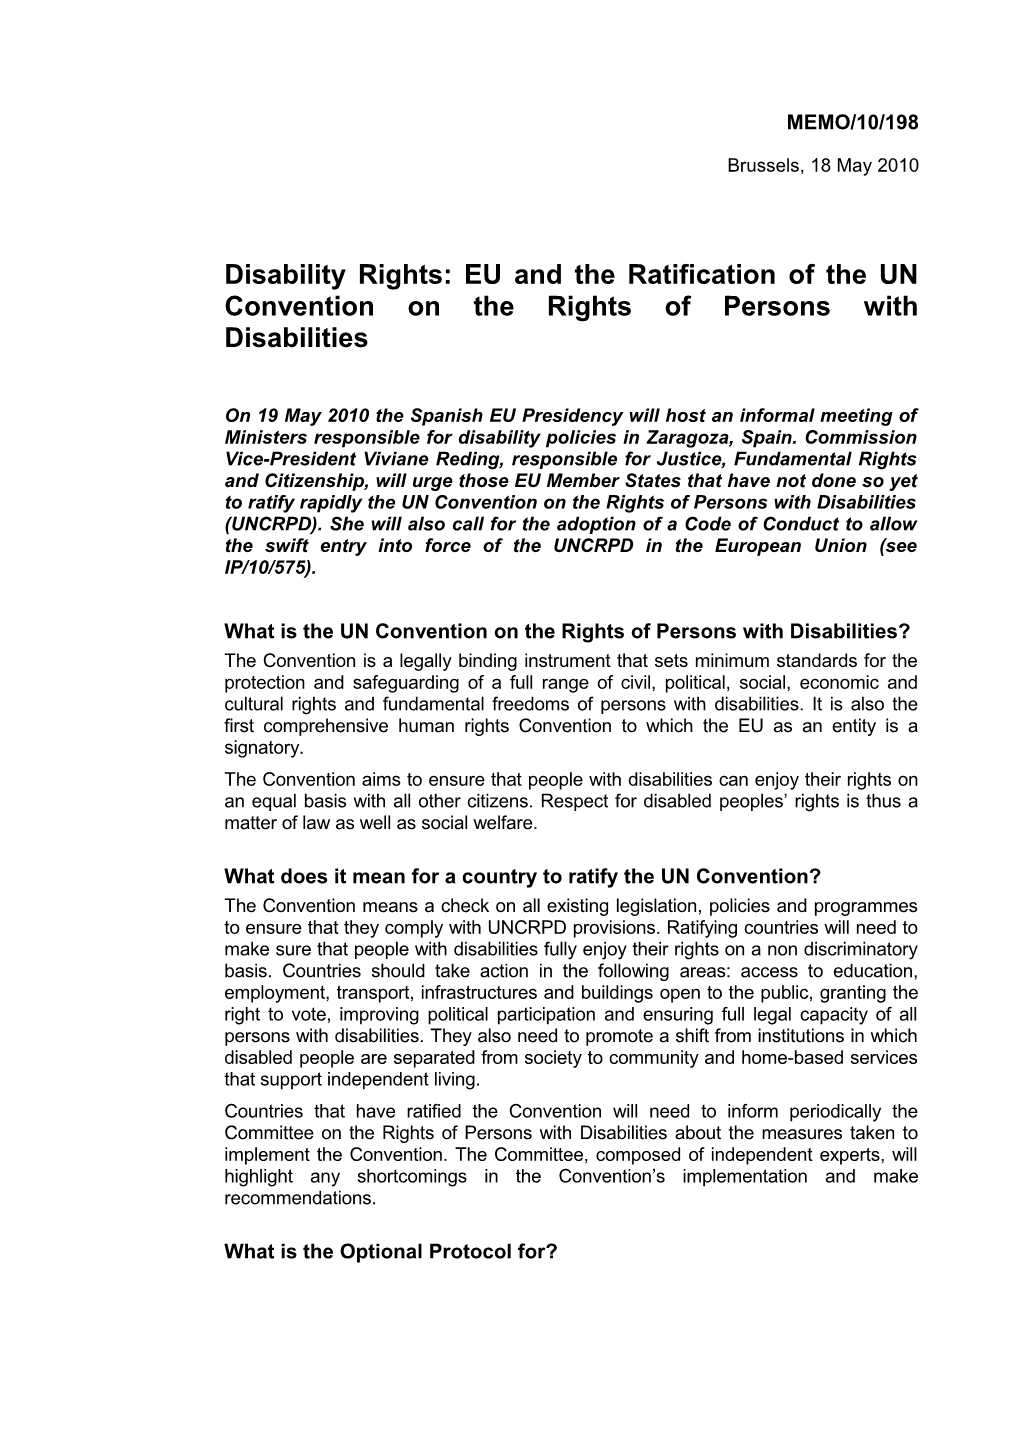 What Is the UN Convention on the Rights of Persons with Disabilities?